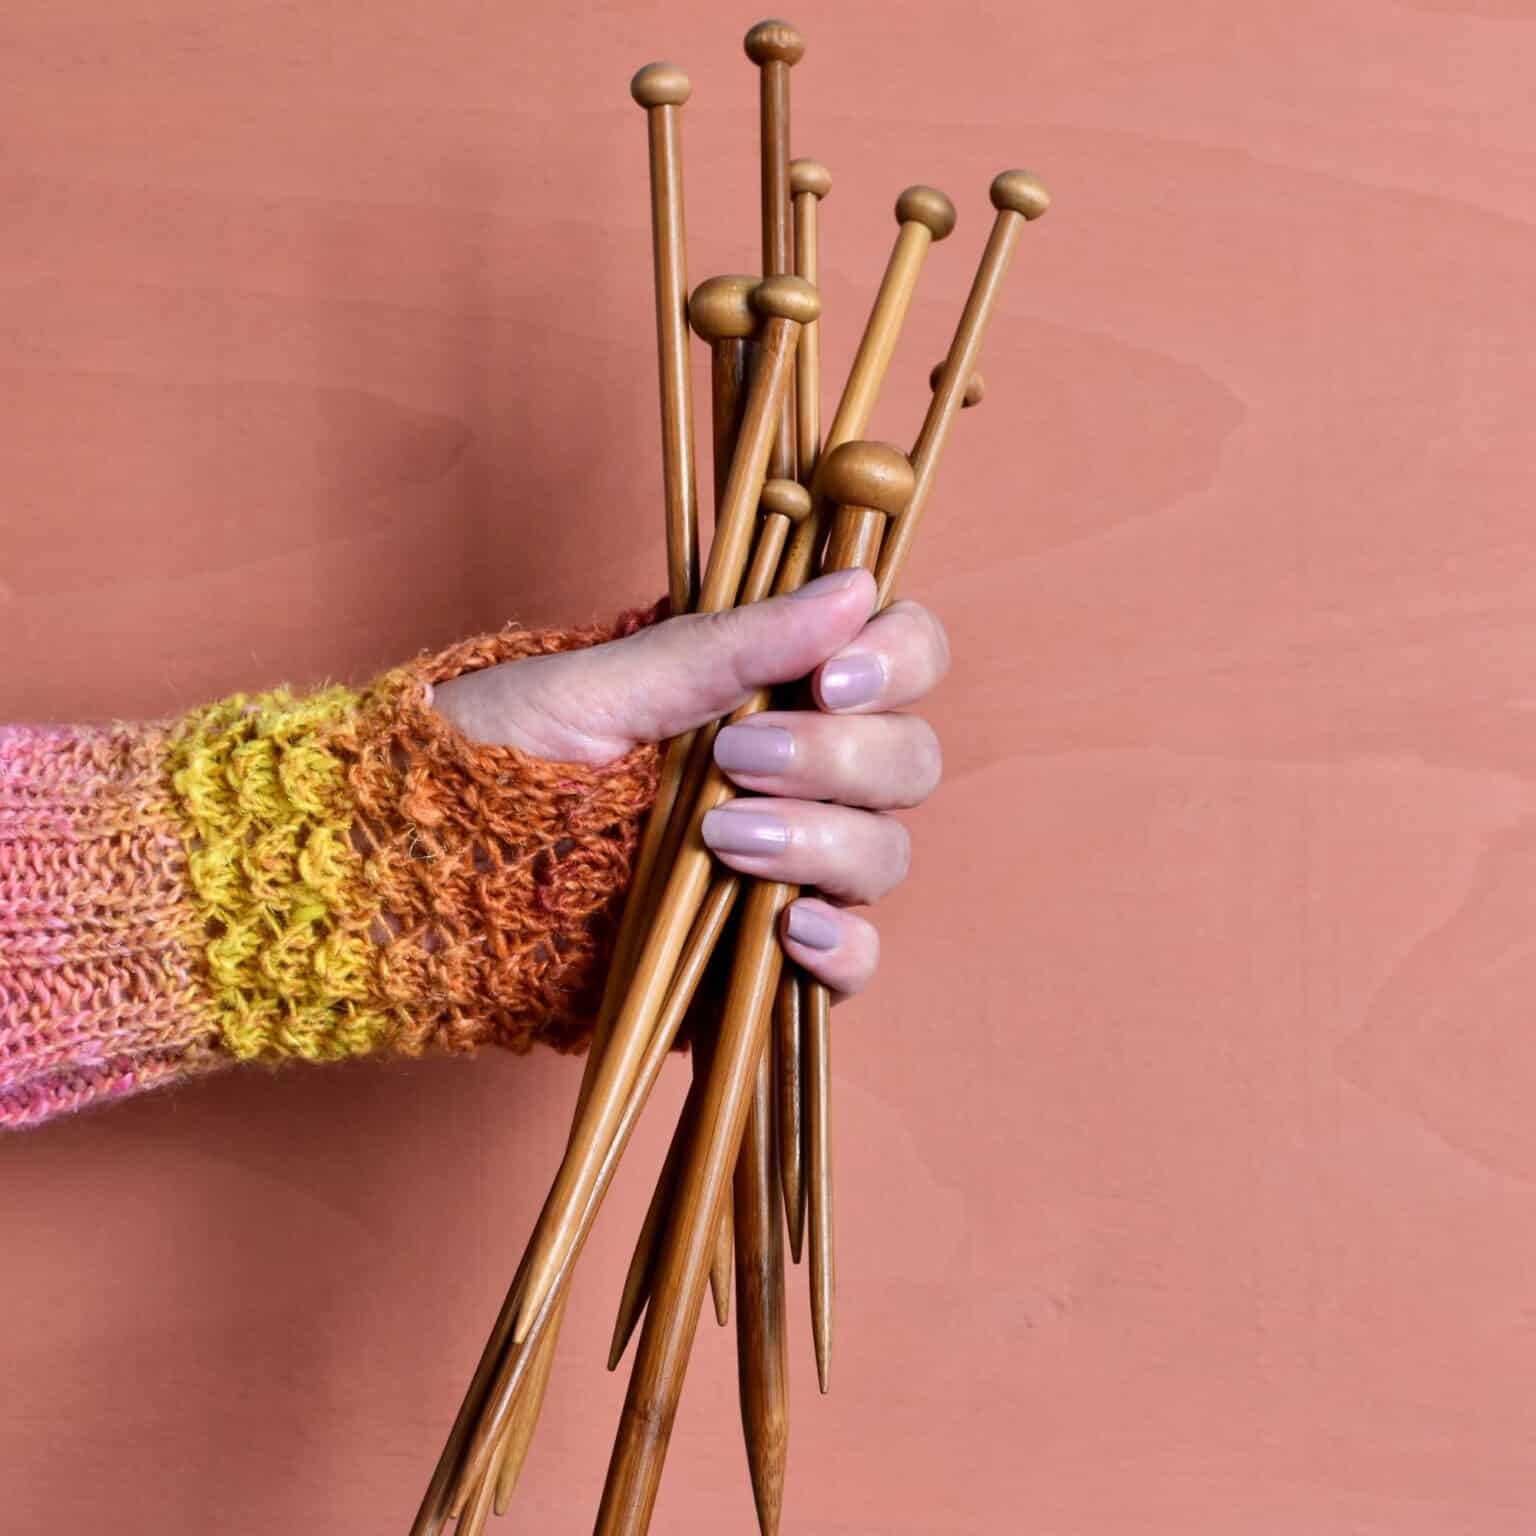 Knitting Needle Size Chart: Types & Comparisons - Easy Crochet Patterns